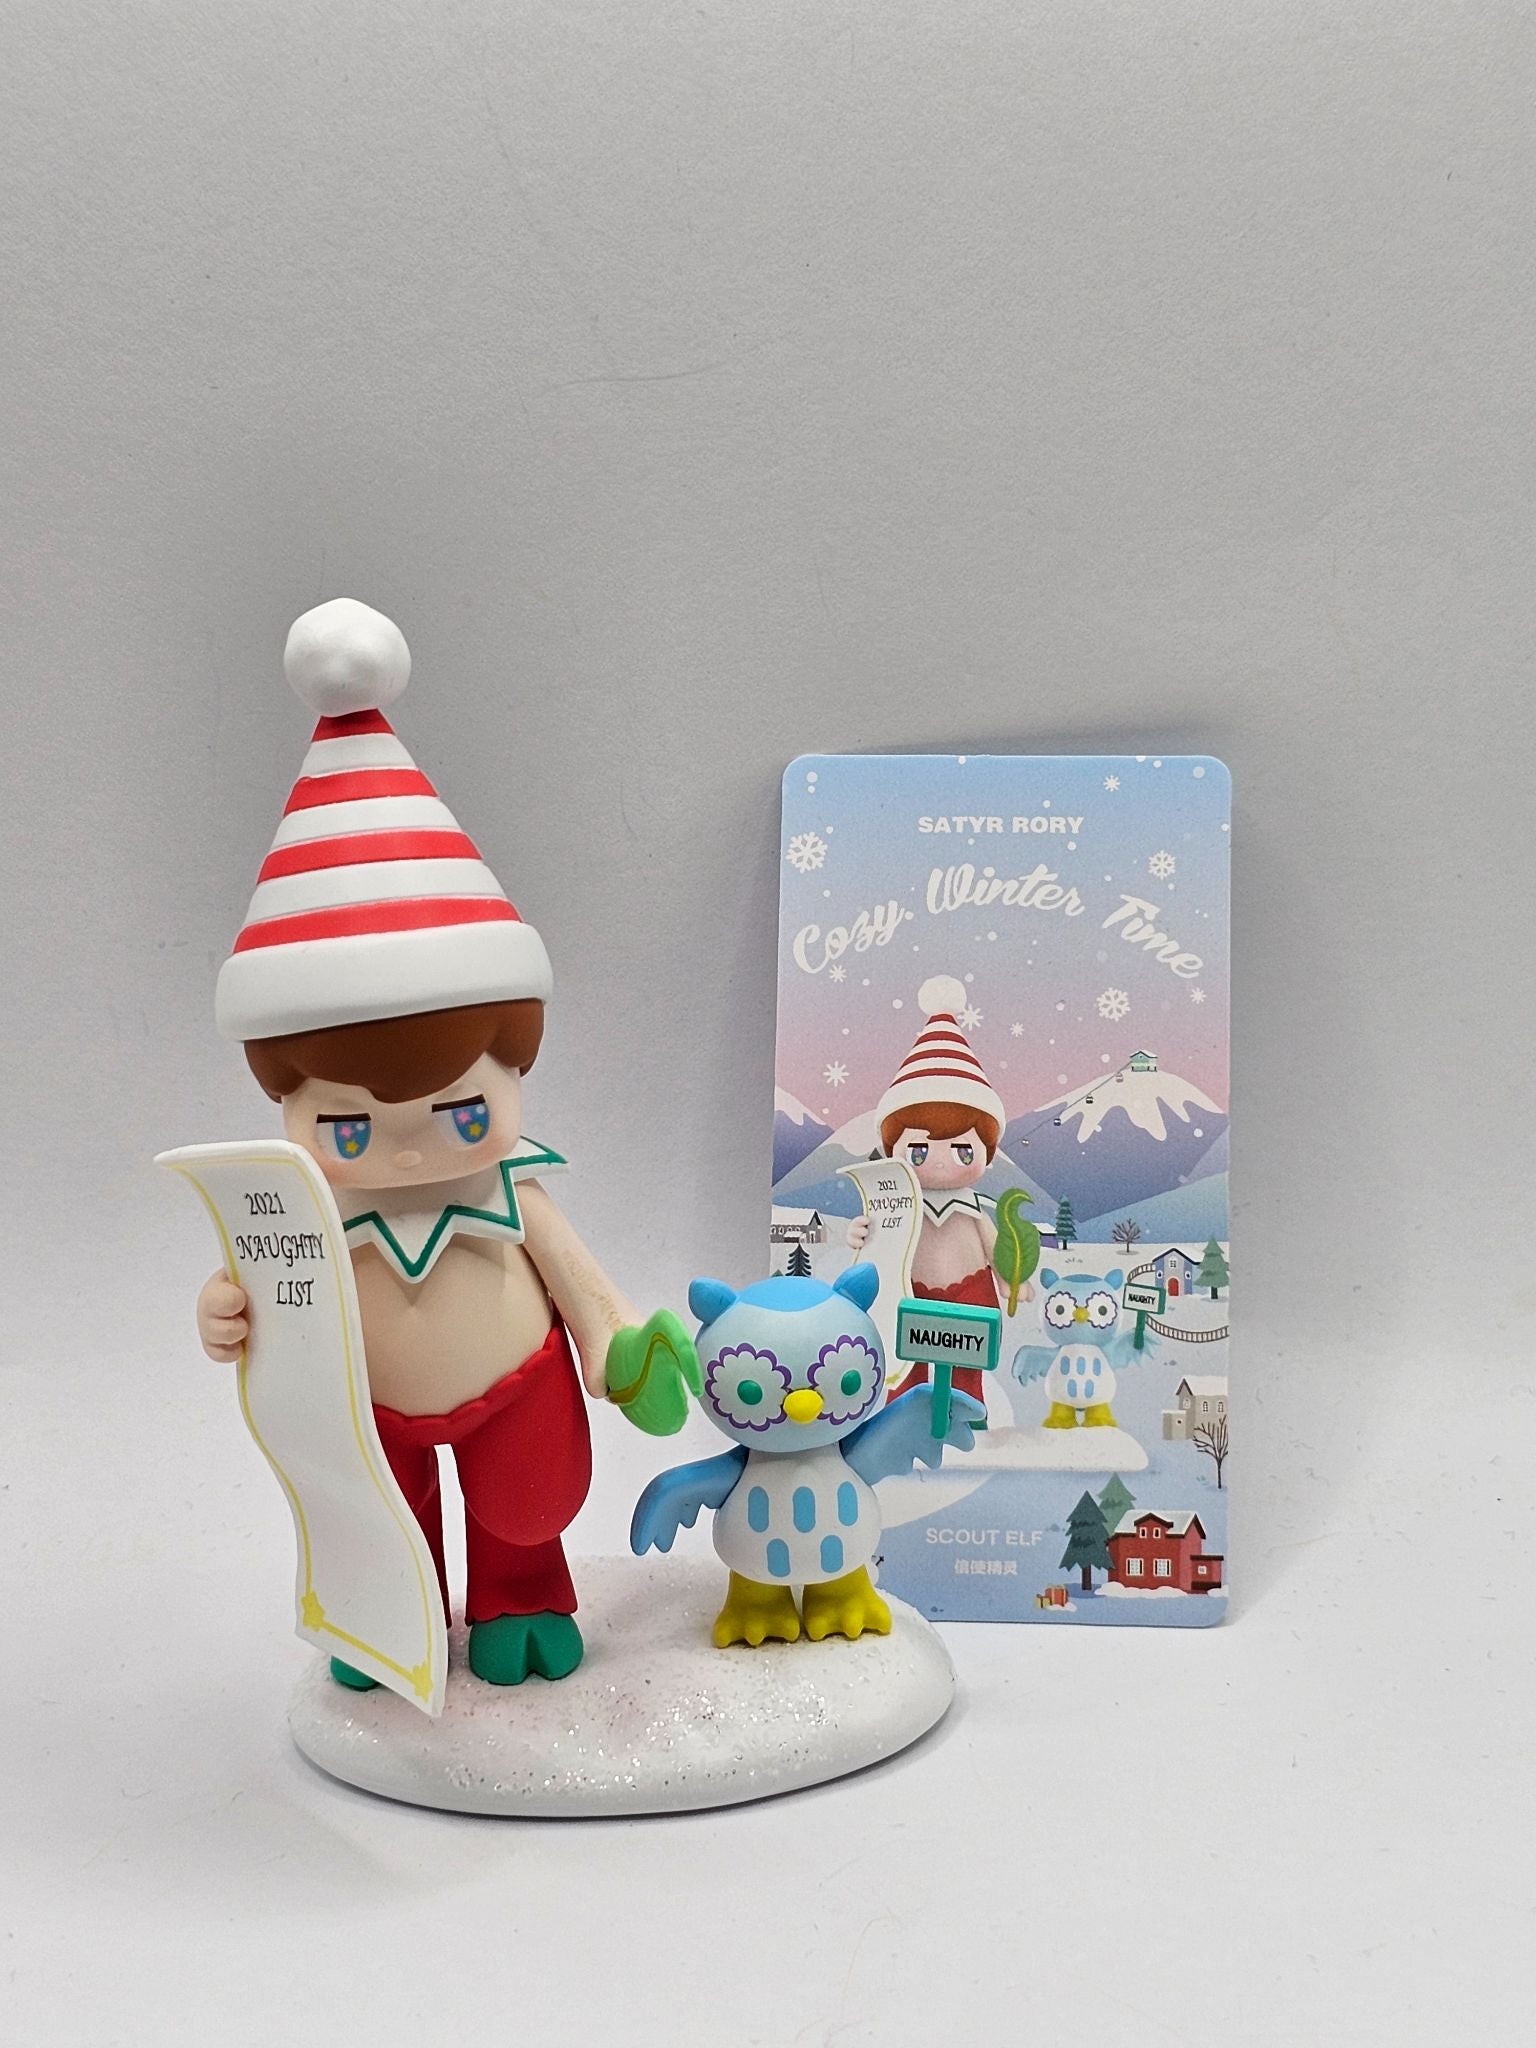 Scout Elf - Satyr Rory Cozy Winter Time Blind Box Series - Popmart - 1